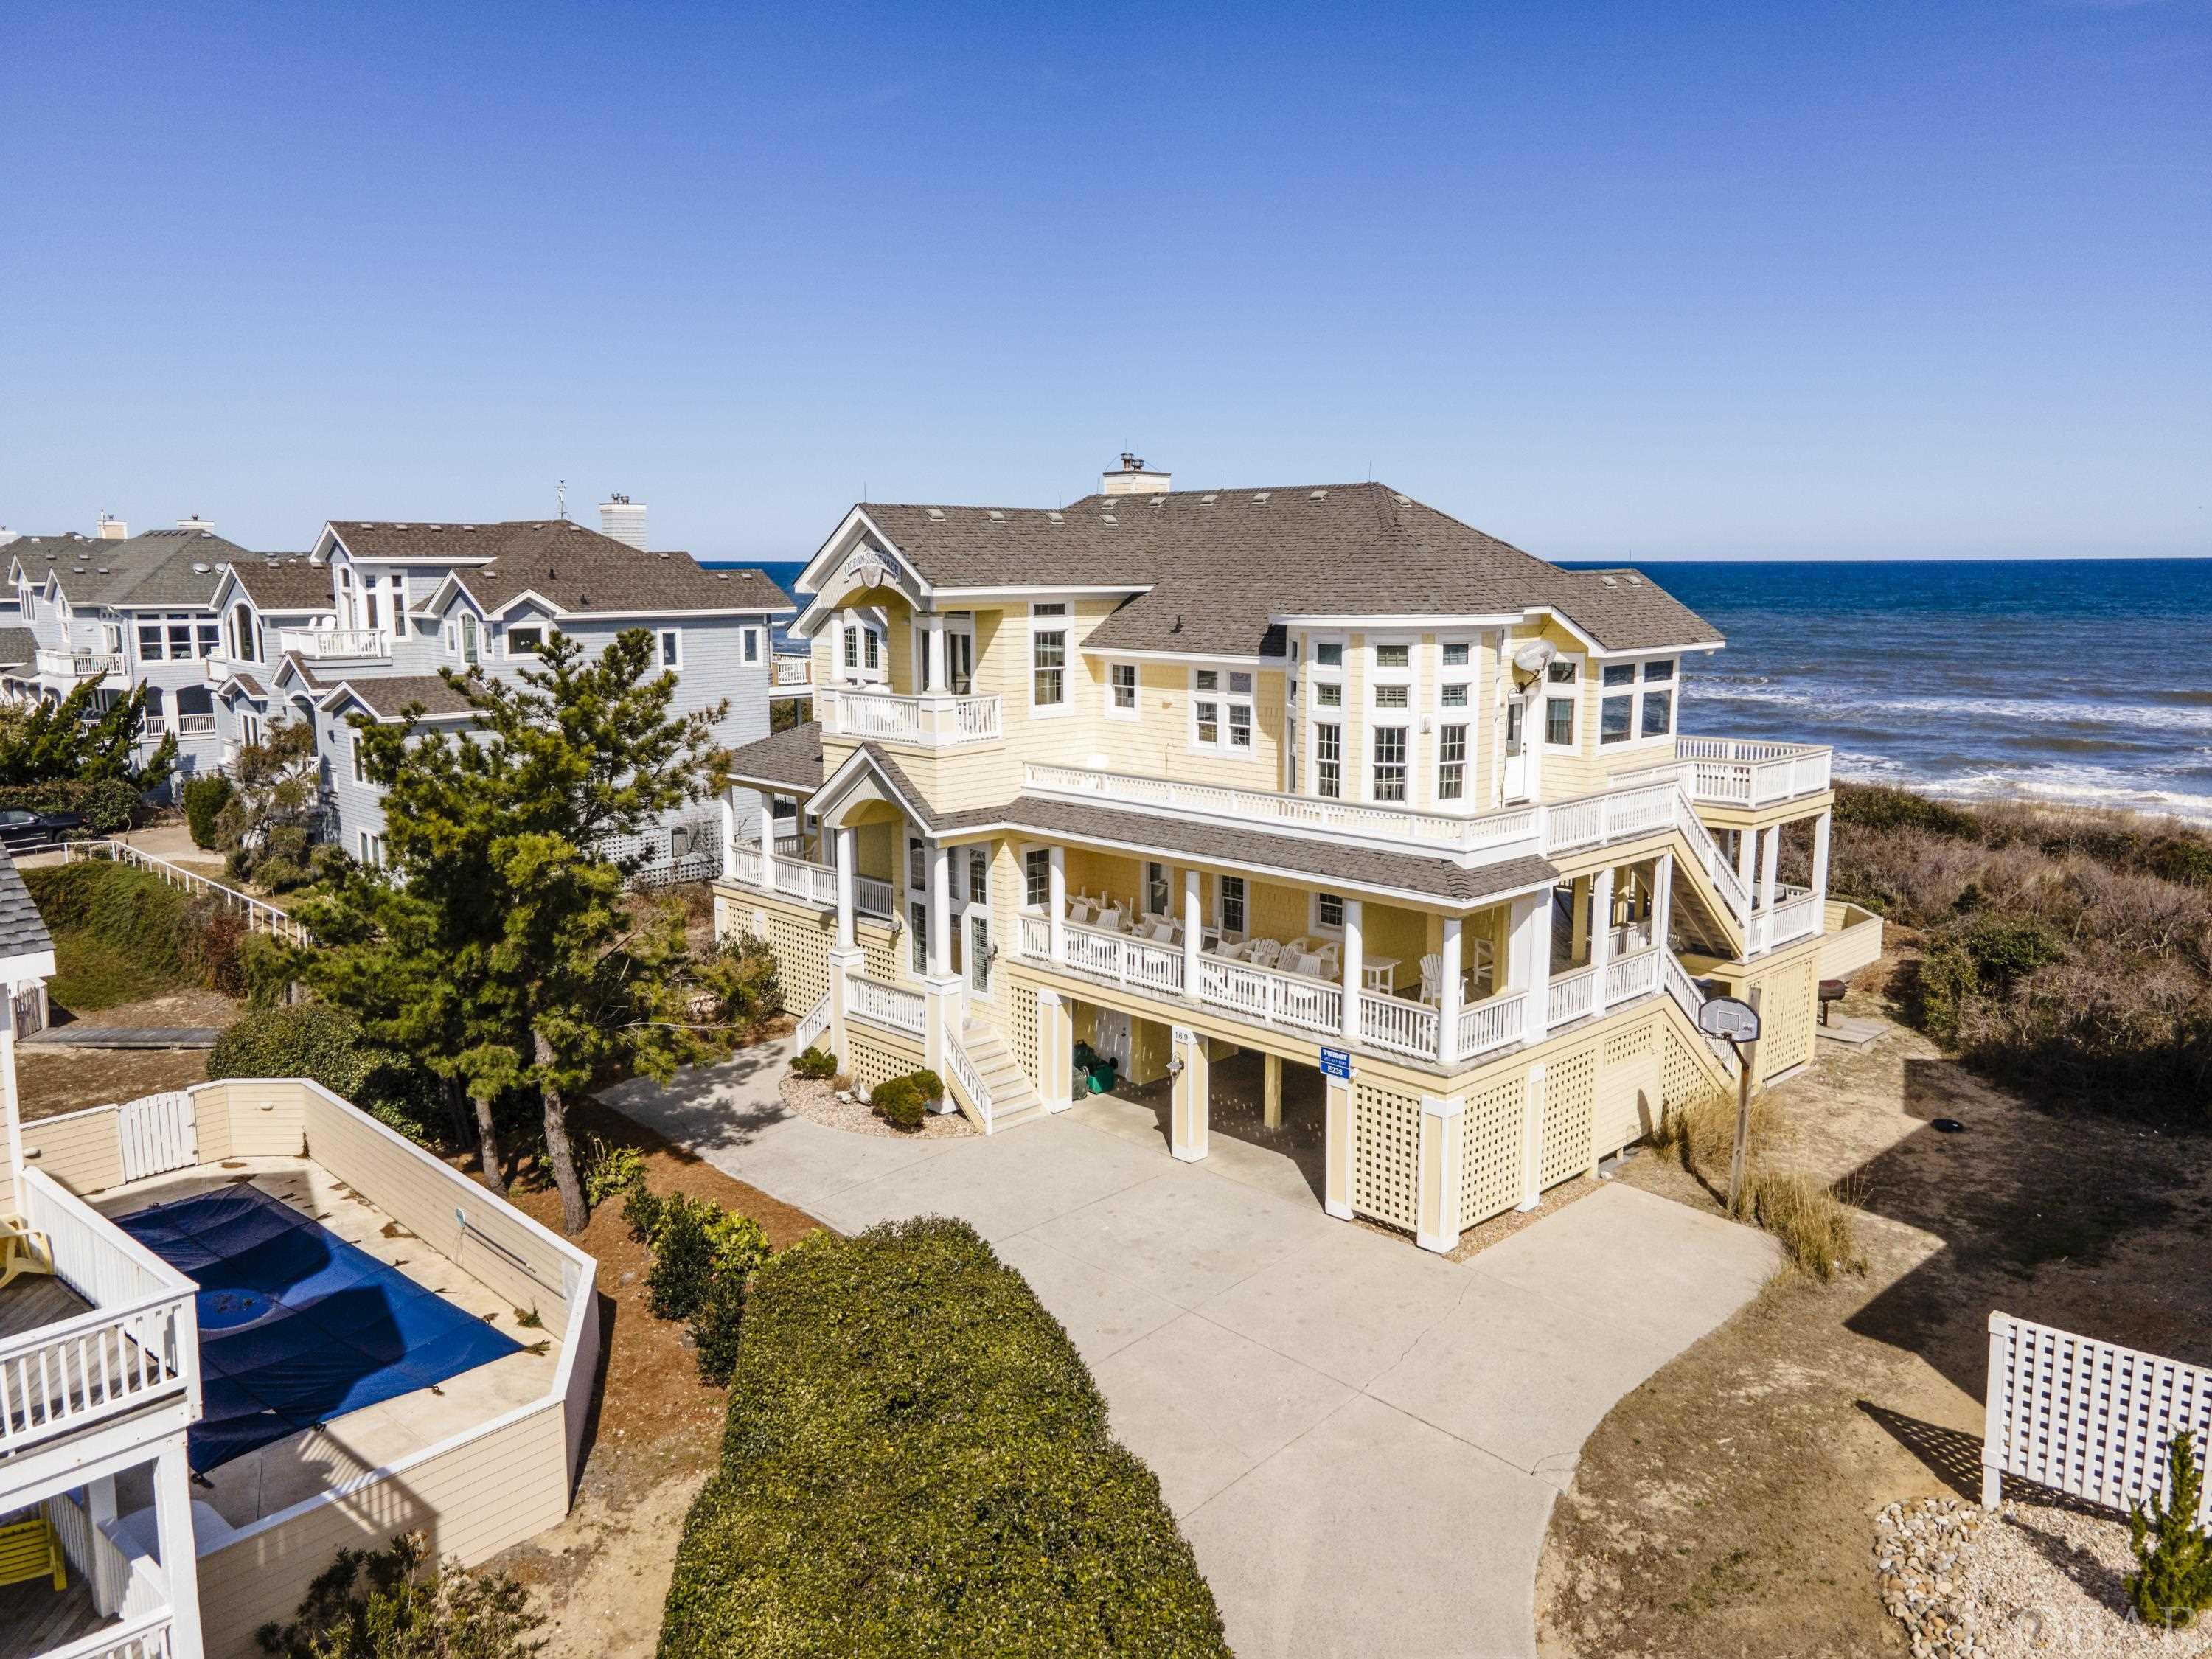 Welcome to Ocean Serenade, located on Salt House Road in the coveted Pine Island neighborhood of Corolla. Situated on an elevated lot with panoramic ocean to sound views, this stretch of beach is one of the most unique and highly sought-after locations on the Outer Banks. This meticulously maintained 7-bedroom, oceanfront home has been a proven rental producer for the original owner over the years. Loaded with private and community amenities including a private pool, elevator, rec room, and Control4 Smart Home features that allow you to control features of the house from your tablet and phone make this a rental investment that you don’t want to miss! Set up as a reverse floor plan, the top level boasts a large open layout with a fully equipped updated kitchen, great room, oceanfront reading nook, and a soundside upper-level loft with a private deck and a large ensuite bedroom. The middle level has 4 bedrooms (2 ensuite) which have access to the wrap-around deck where you can enjoy ocean to sound views while relaxing in the hot tub. On the ground level, you’ll find the two remaining bedrooms and a rec room that flows seamlessly outside to the large saltwater pool. Ask the listing agent for a pre-listing home inspection.